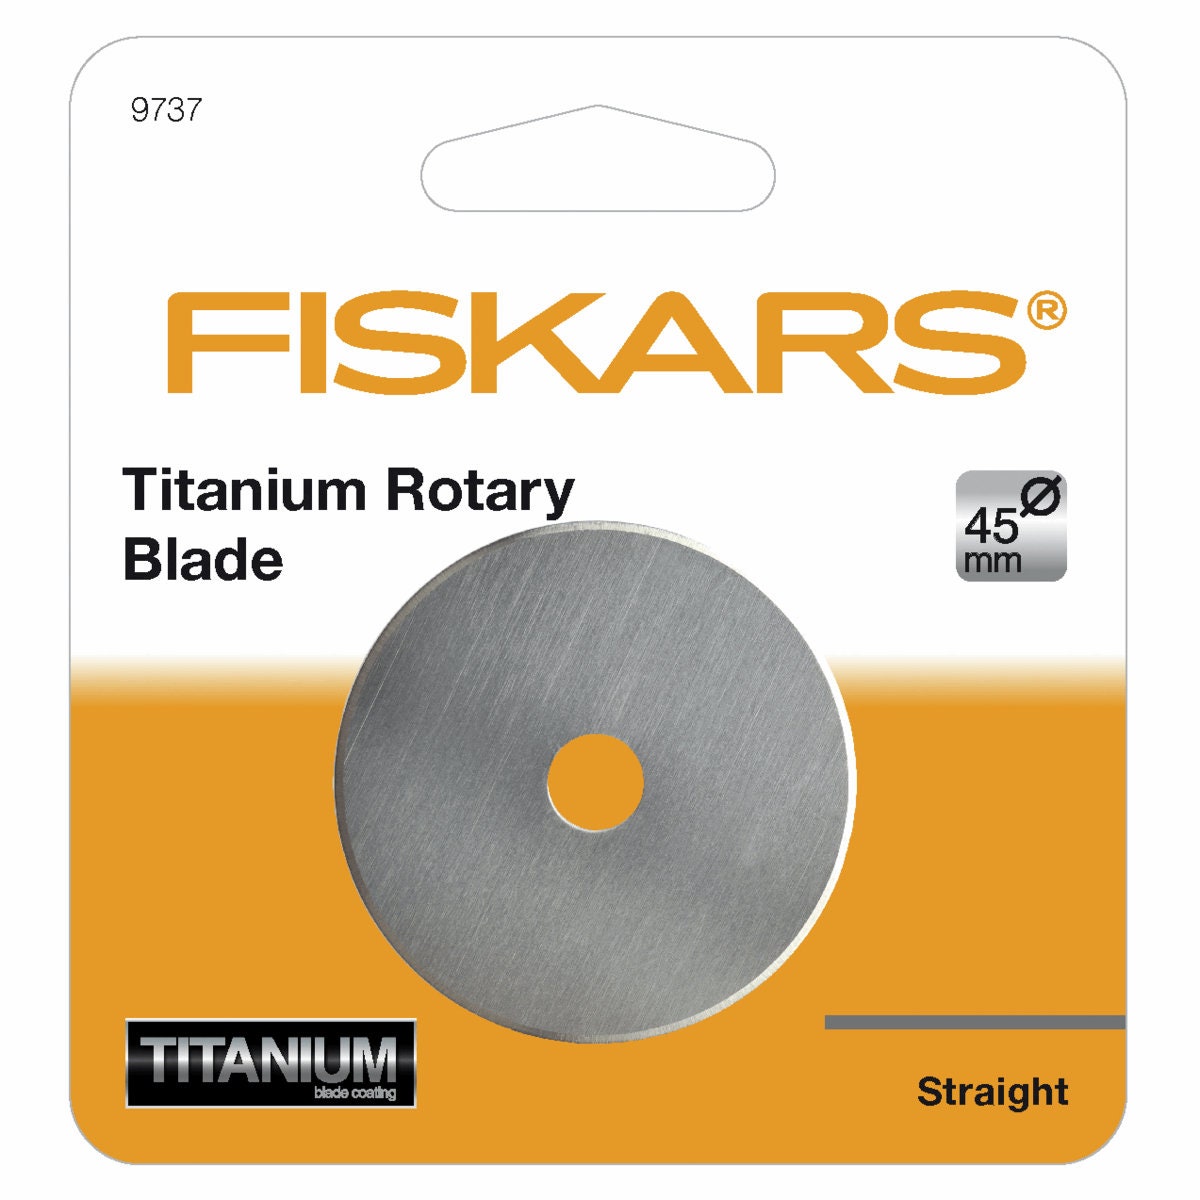 Fiskars 15 Rotary Blade Paper Trimmer Cutter Crafting Tool , Scrapbooking,  Photo Album Card Making Stamping Projects 